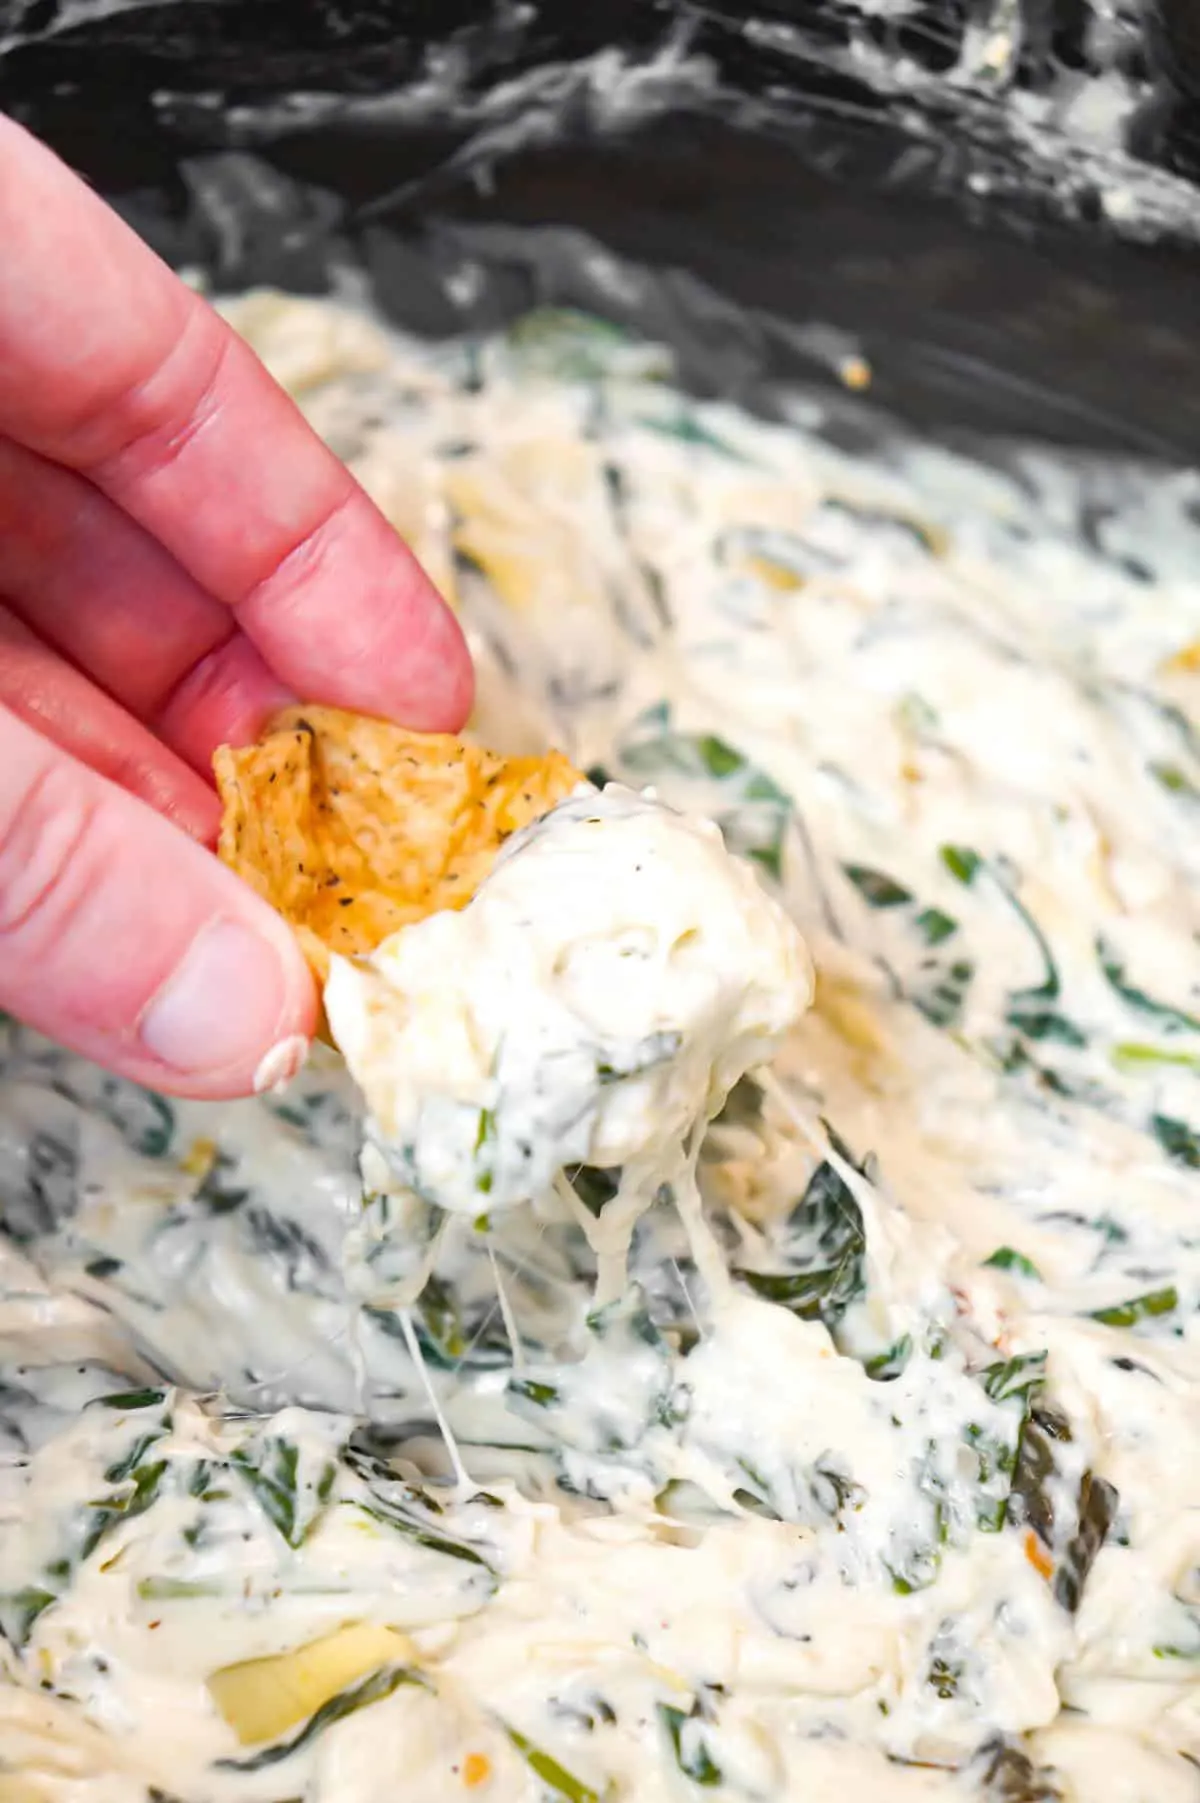 Crock Pot Spinach Artichoke Dip is a delicious hot party dip recipe loaded with baby spinach, chopped artichoke hearts, cream cheese, sour cream, mozzarella and parmesan cheese.